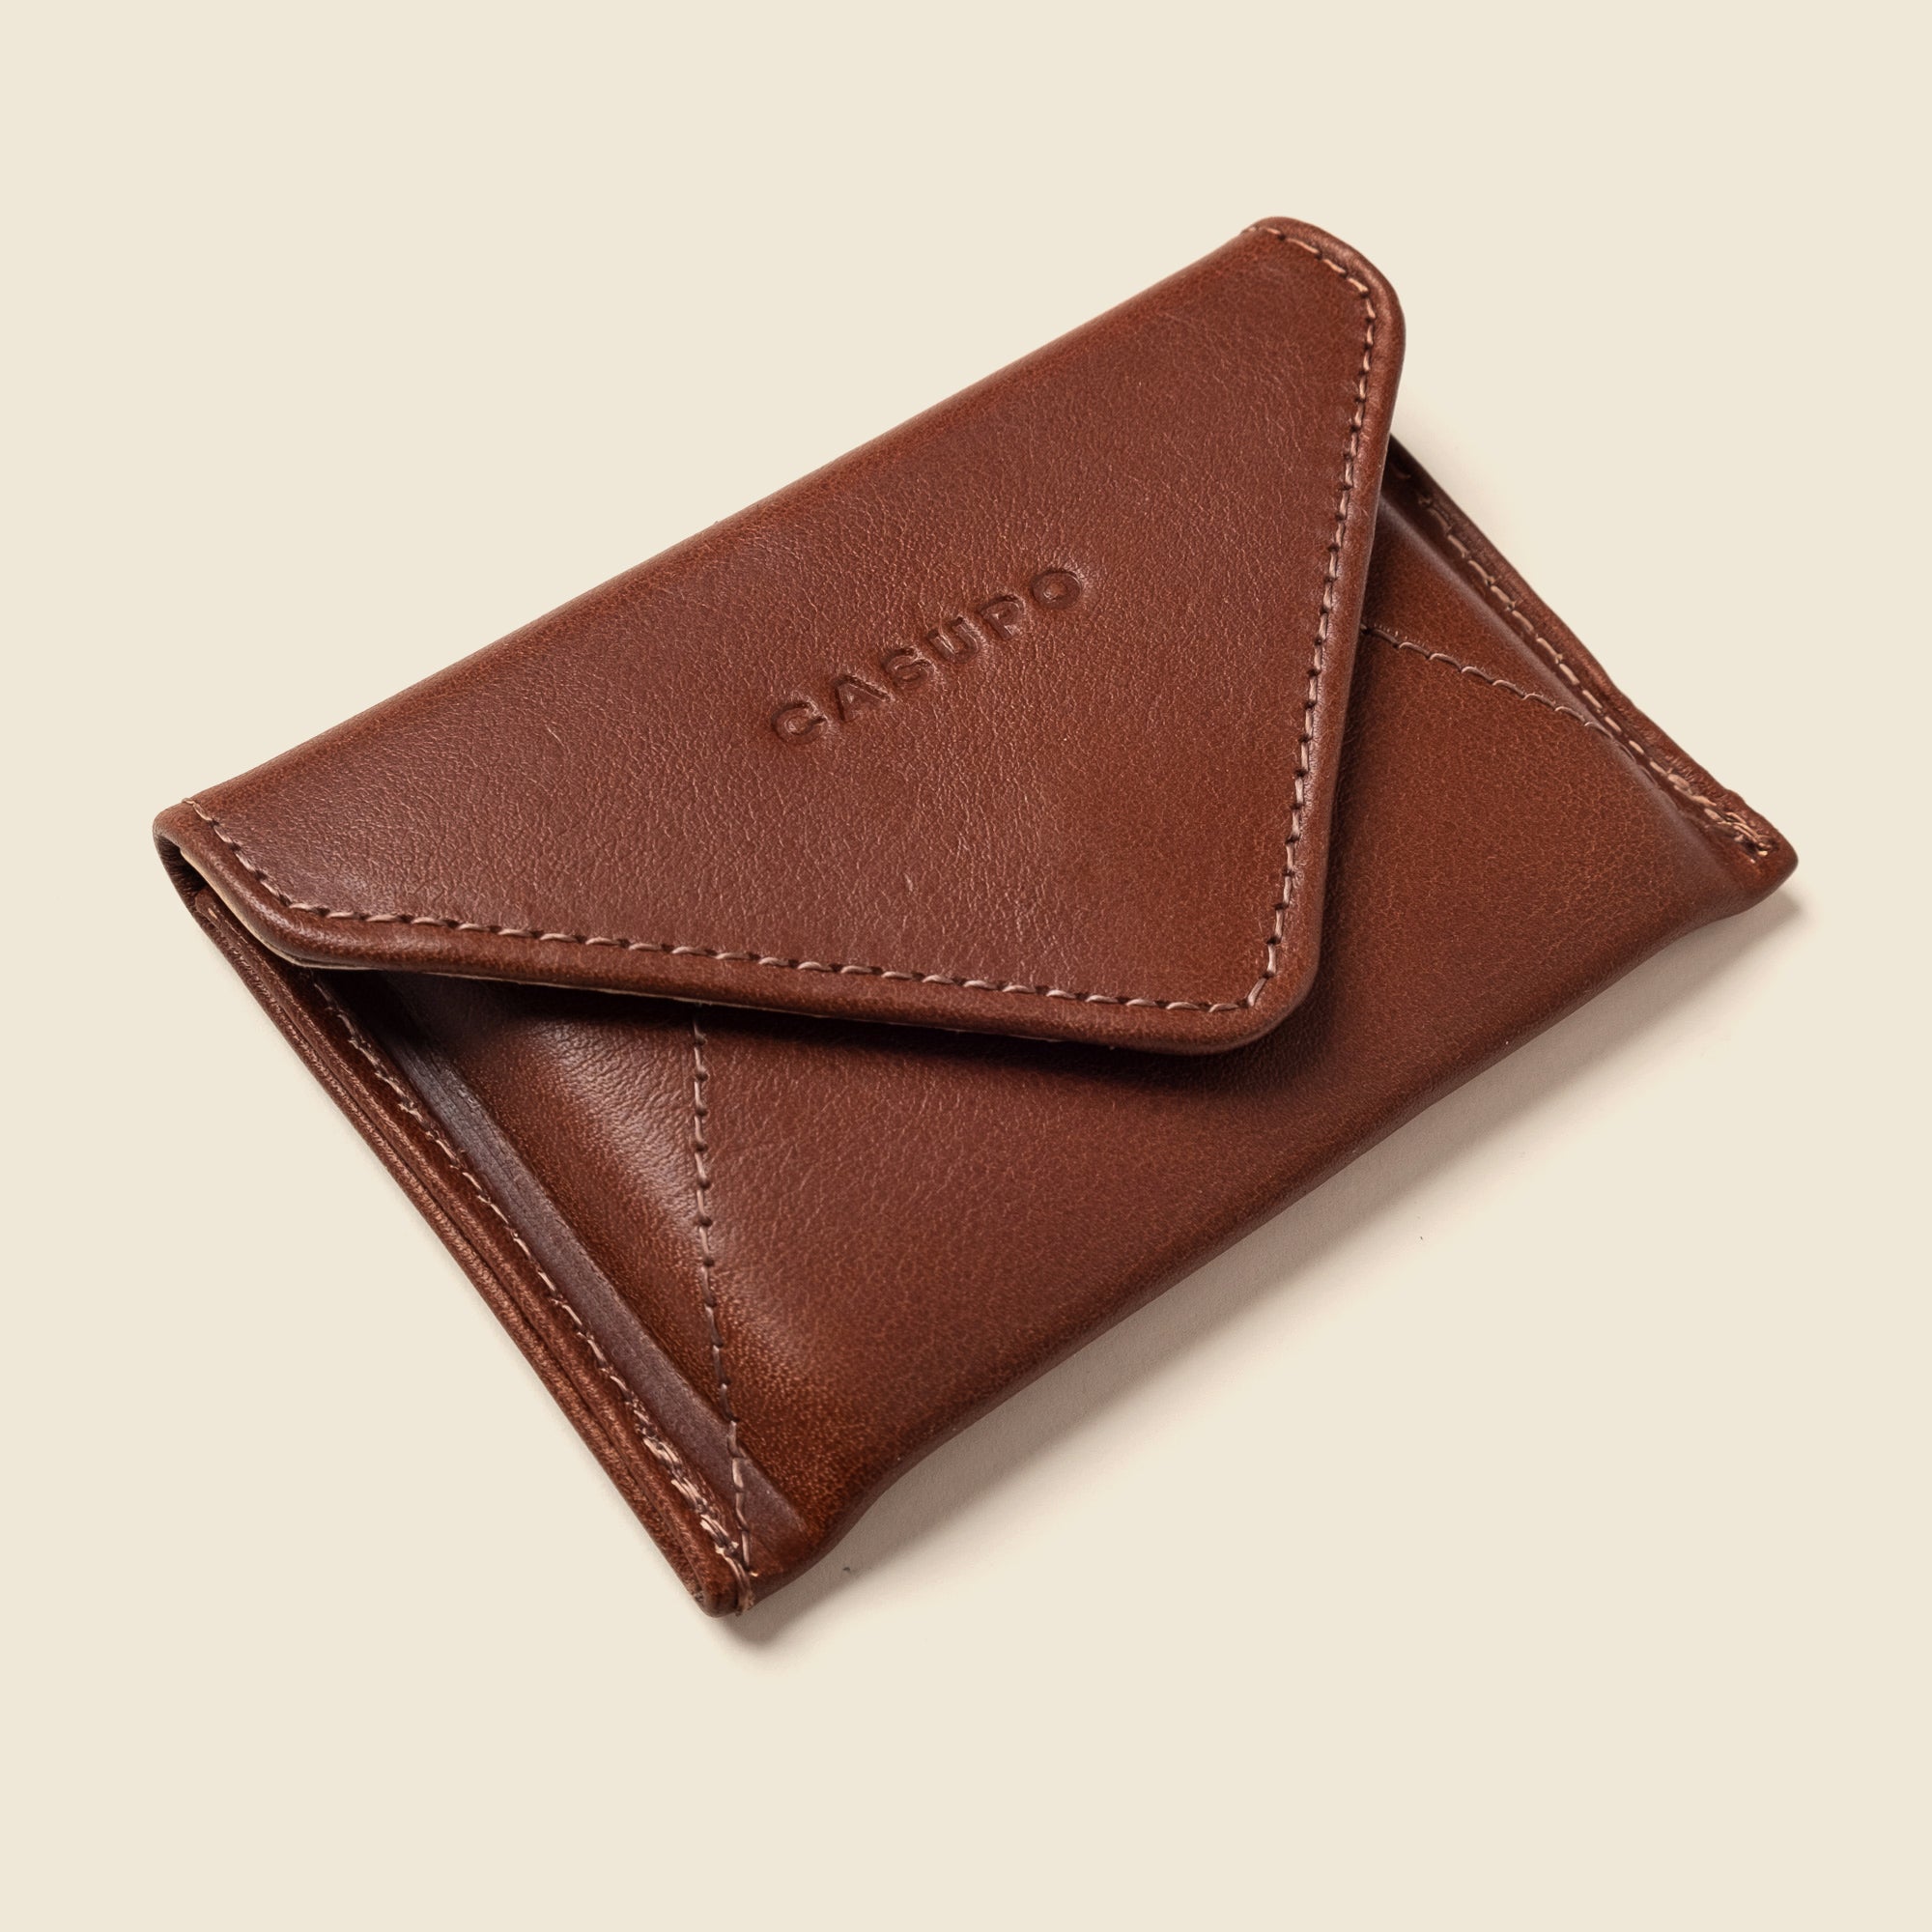 Brown leather wallet with snap